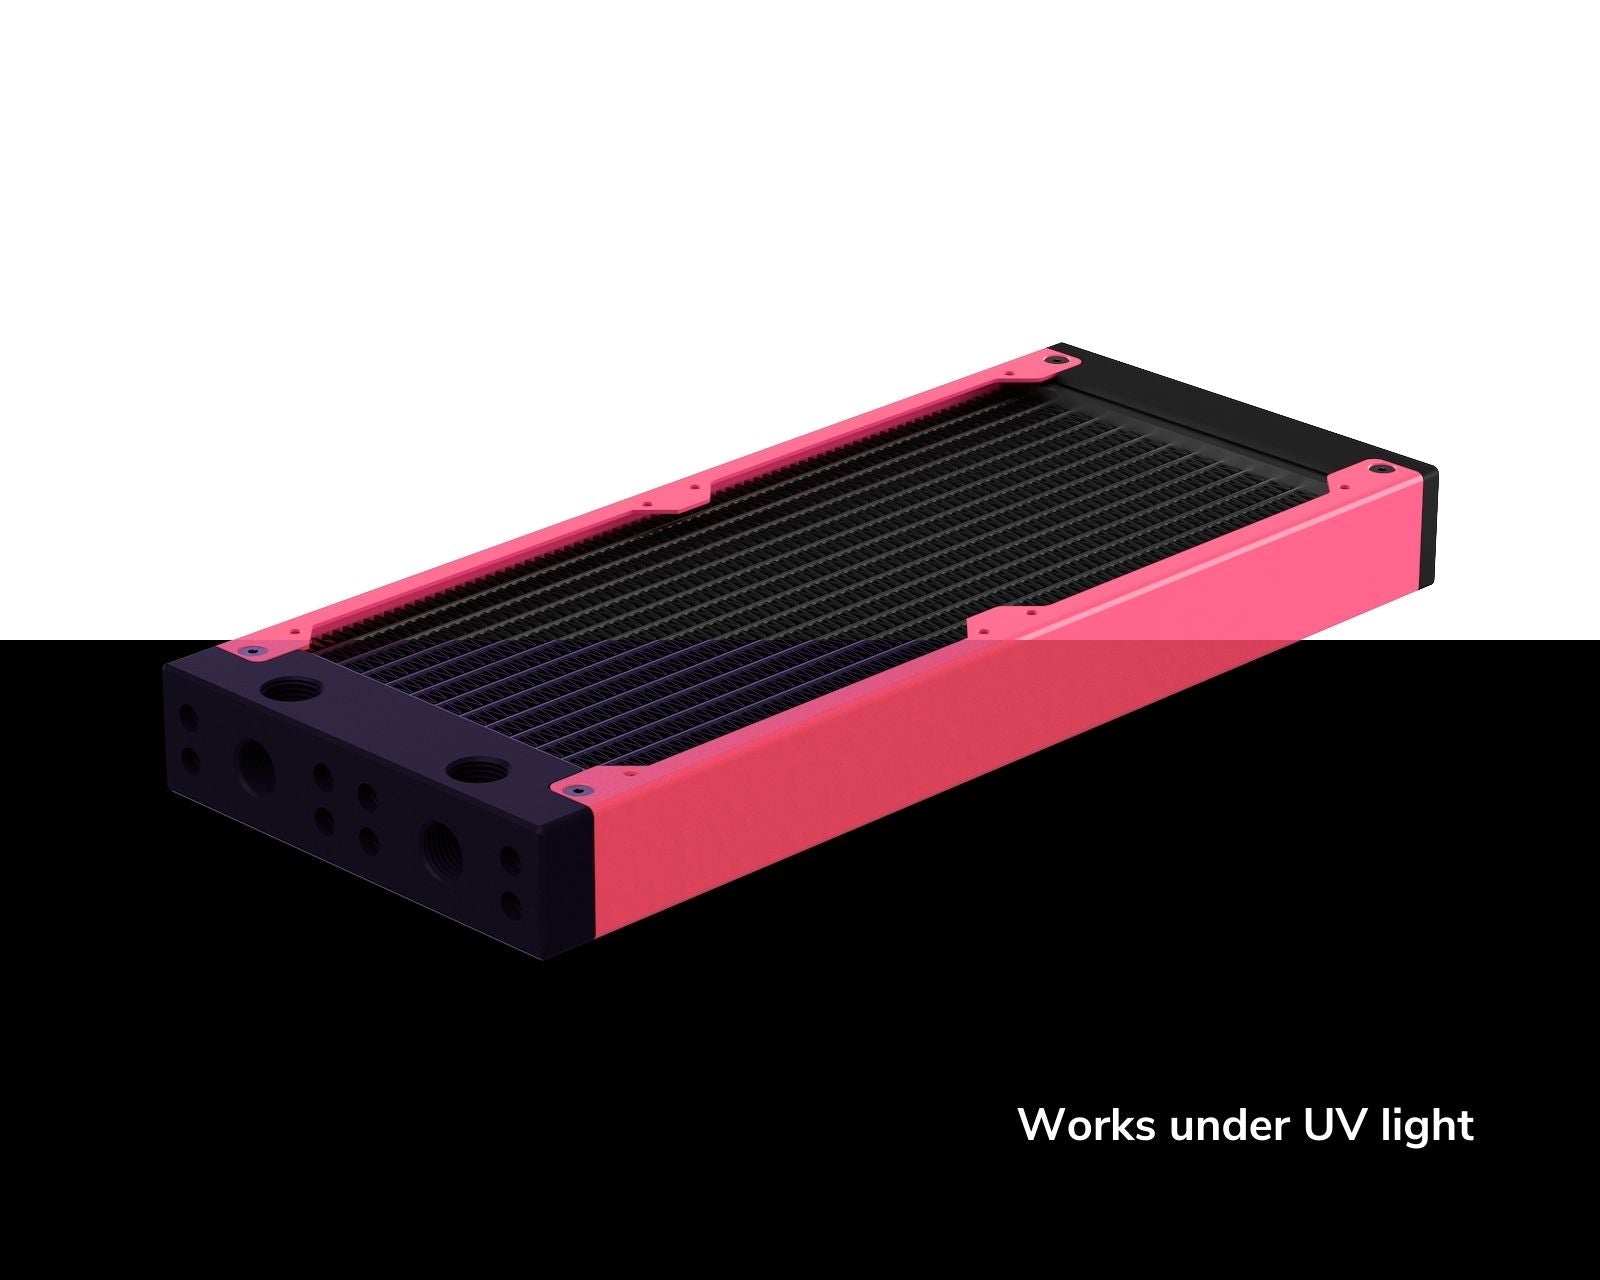 PrimoChill 240SL (30mm) EXIMO Modular Radiator, Black POM, 2x120mm, Dual Fan (R-SL-BK24) Available in 20+ Colors, Assembled in USA and Custom Watercooling Loop Ready - UV Pink